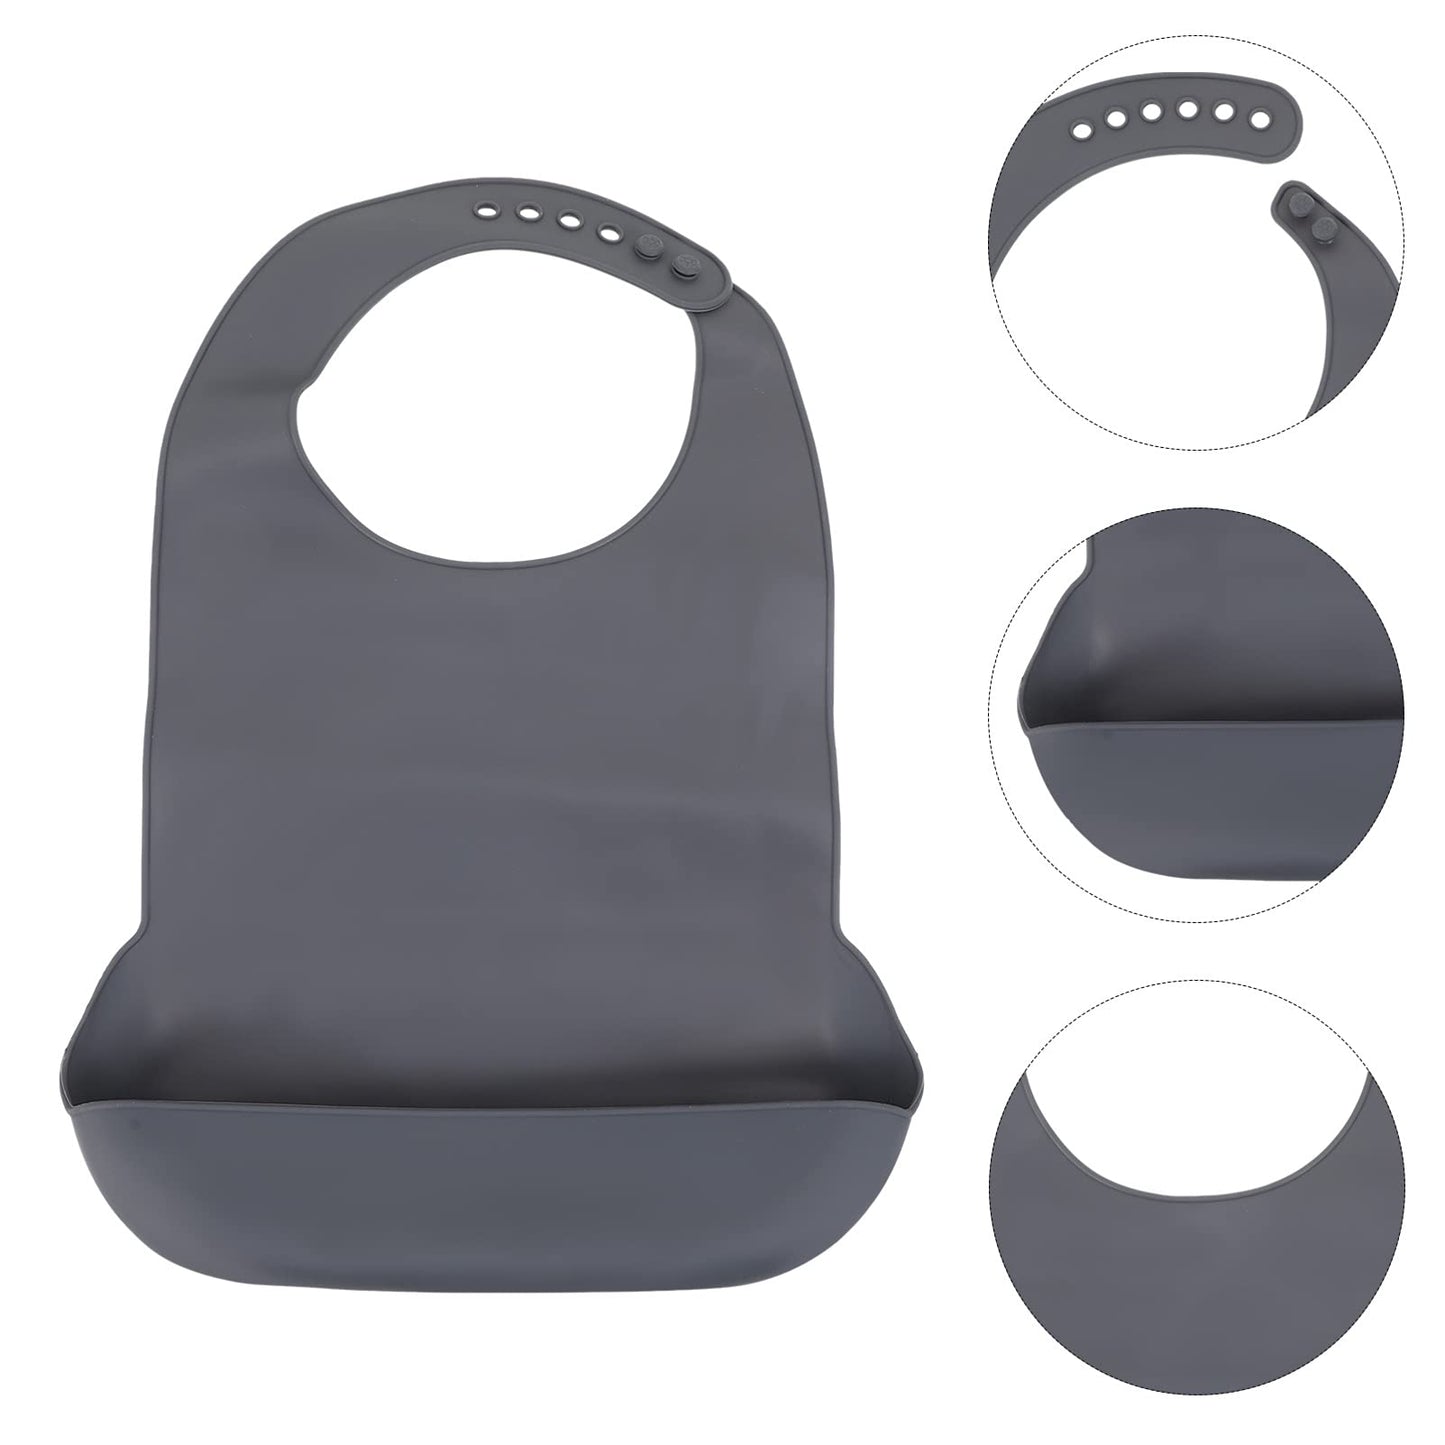 Healifty Silicone Adult Bib Waterproof Eating Bib Washable Adjustable Clothing Protector Reusable Apron Mealtime Cloth with Crumb Catcher Pocket for Elderly Disabled Grey